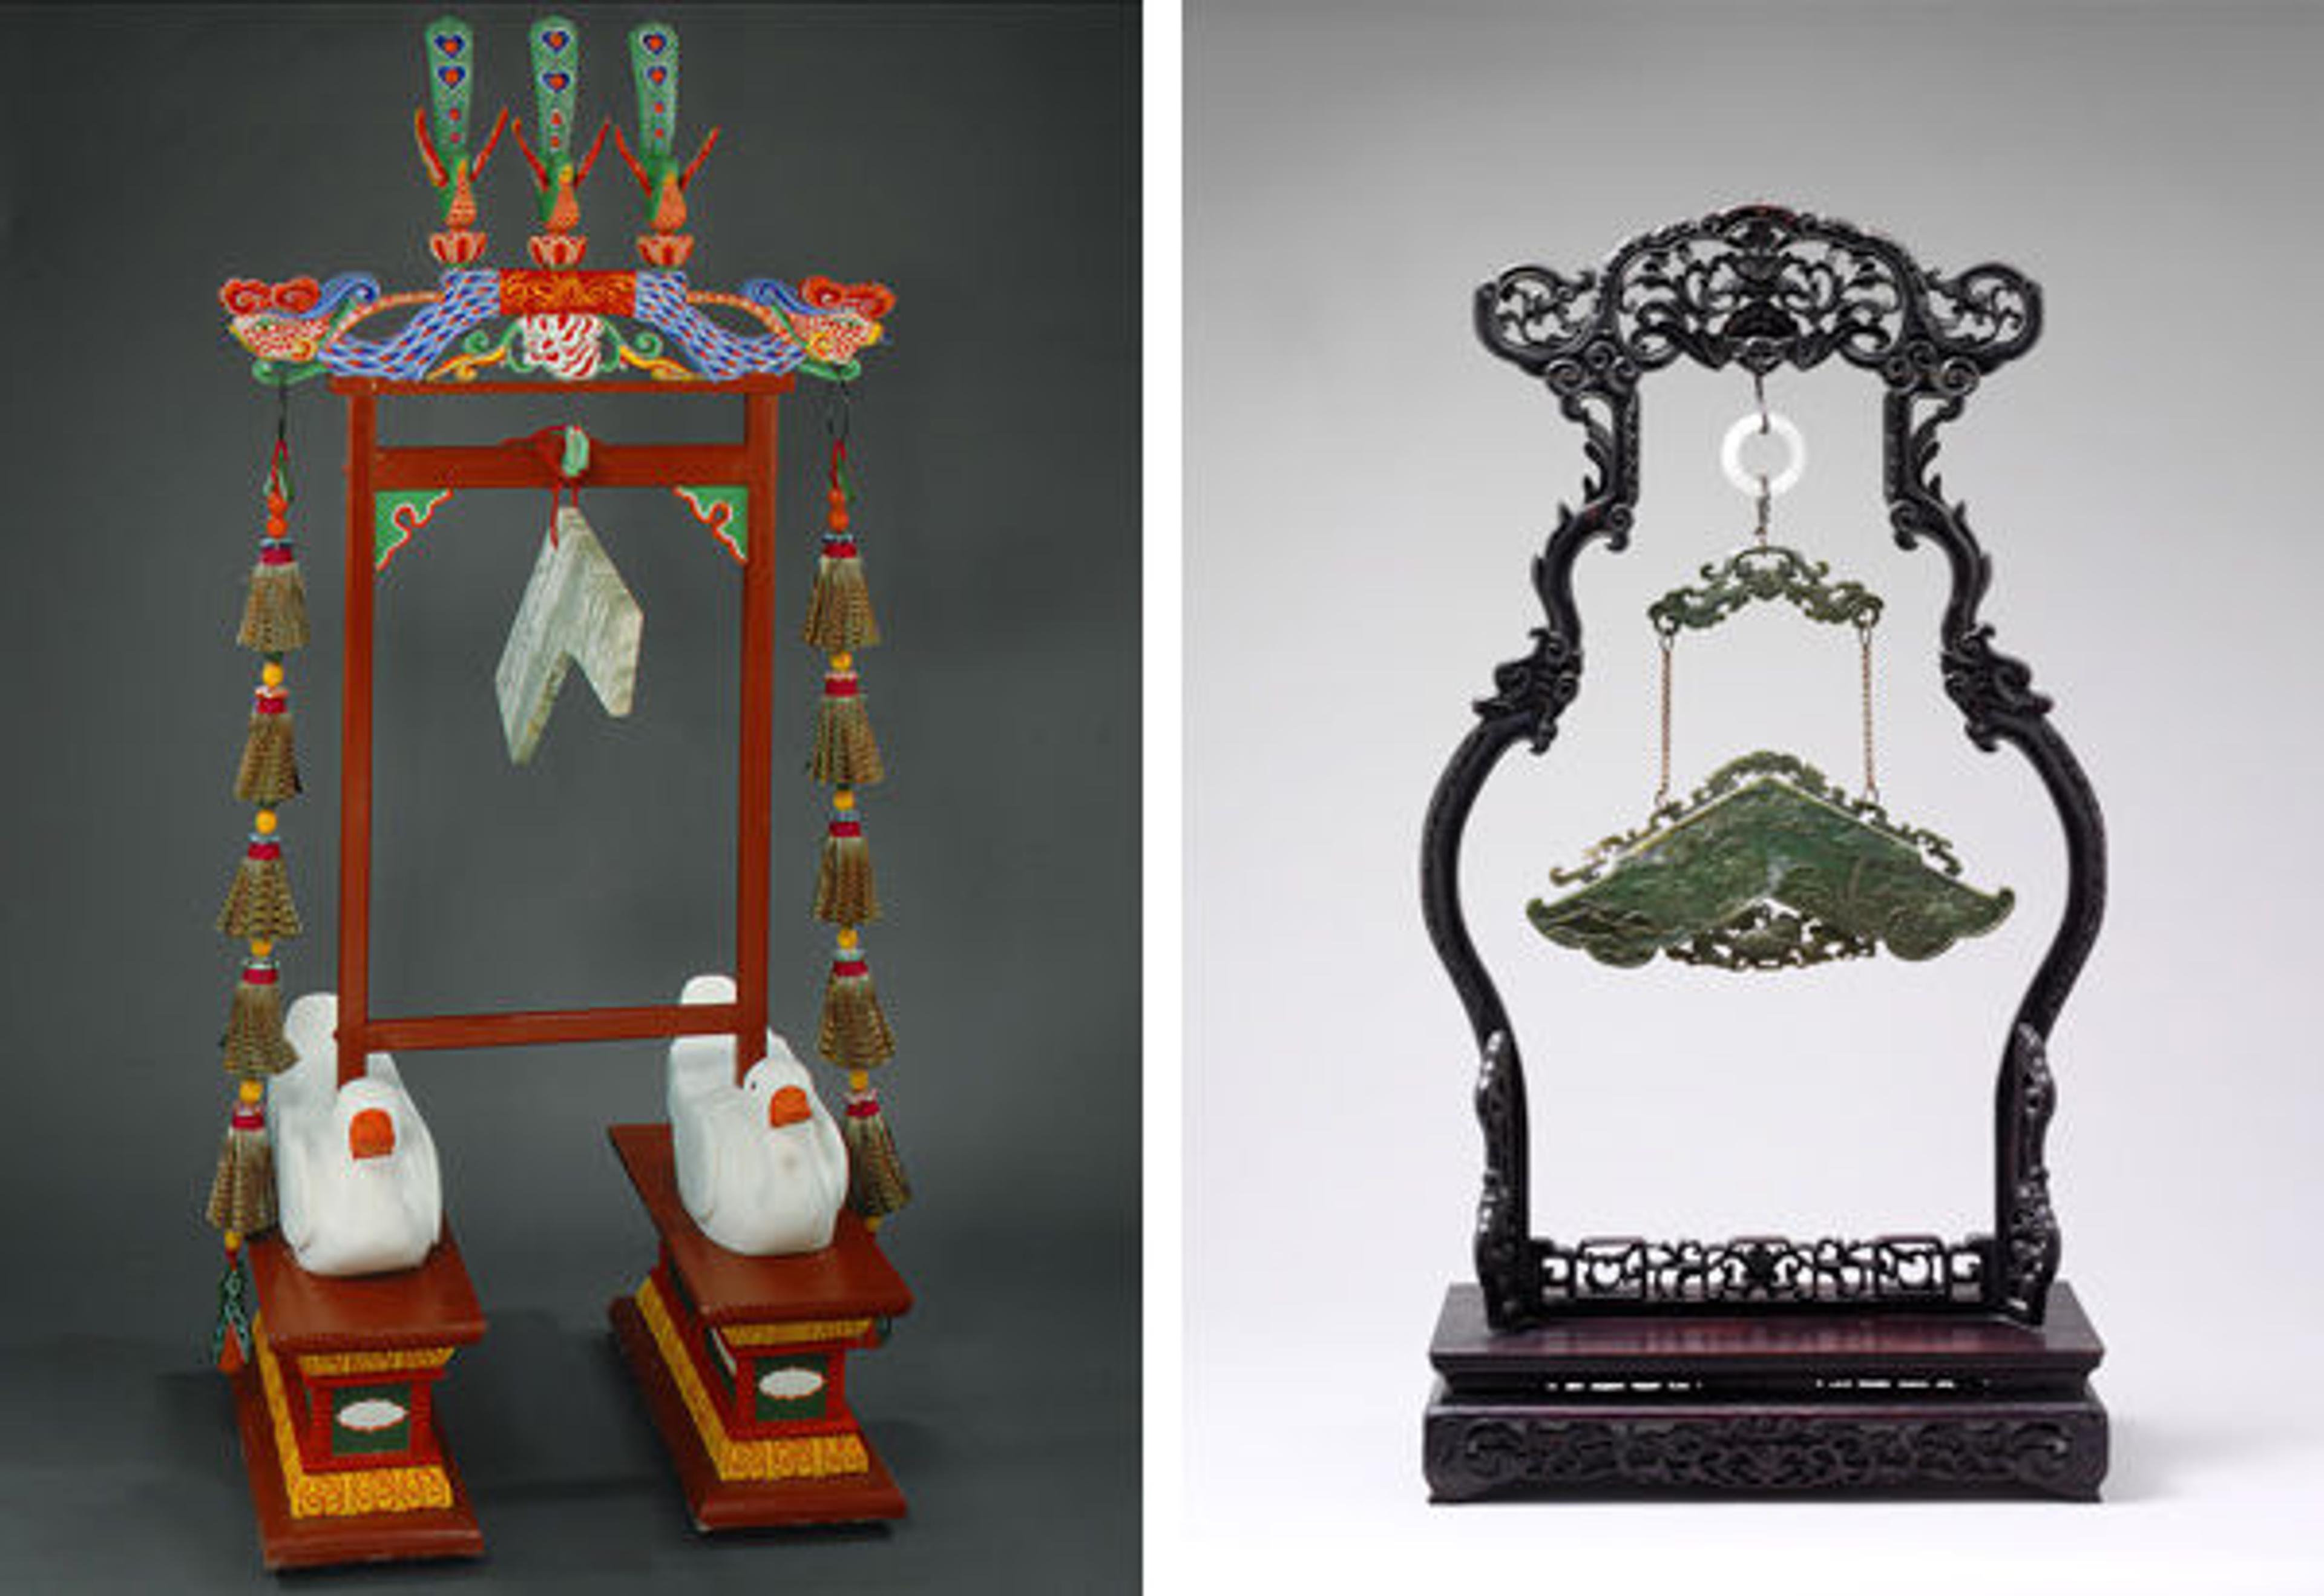 Left: T'ukkyong, ca. 1981. Korea. Wood, marble, feather, beads, horn. The Metropolitan Museum of Art, New York, Gift of Korean Cultural Service, 1982 (1982.171.3a-c). Right: Teqing, late 19th century. China. Jade. The Metropolitan Museum of Art, New York, The Crosby Brown Collection of Musical Instruments, 1889 (89.4.1795)